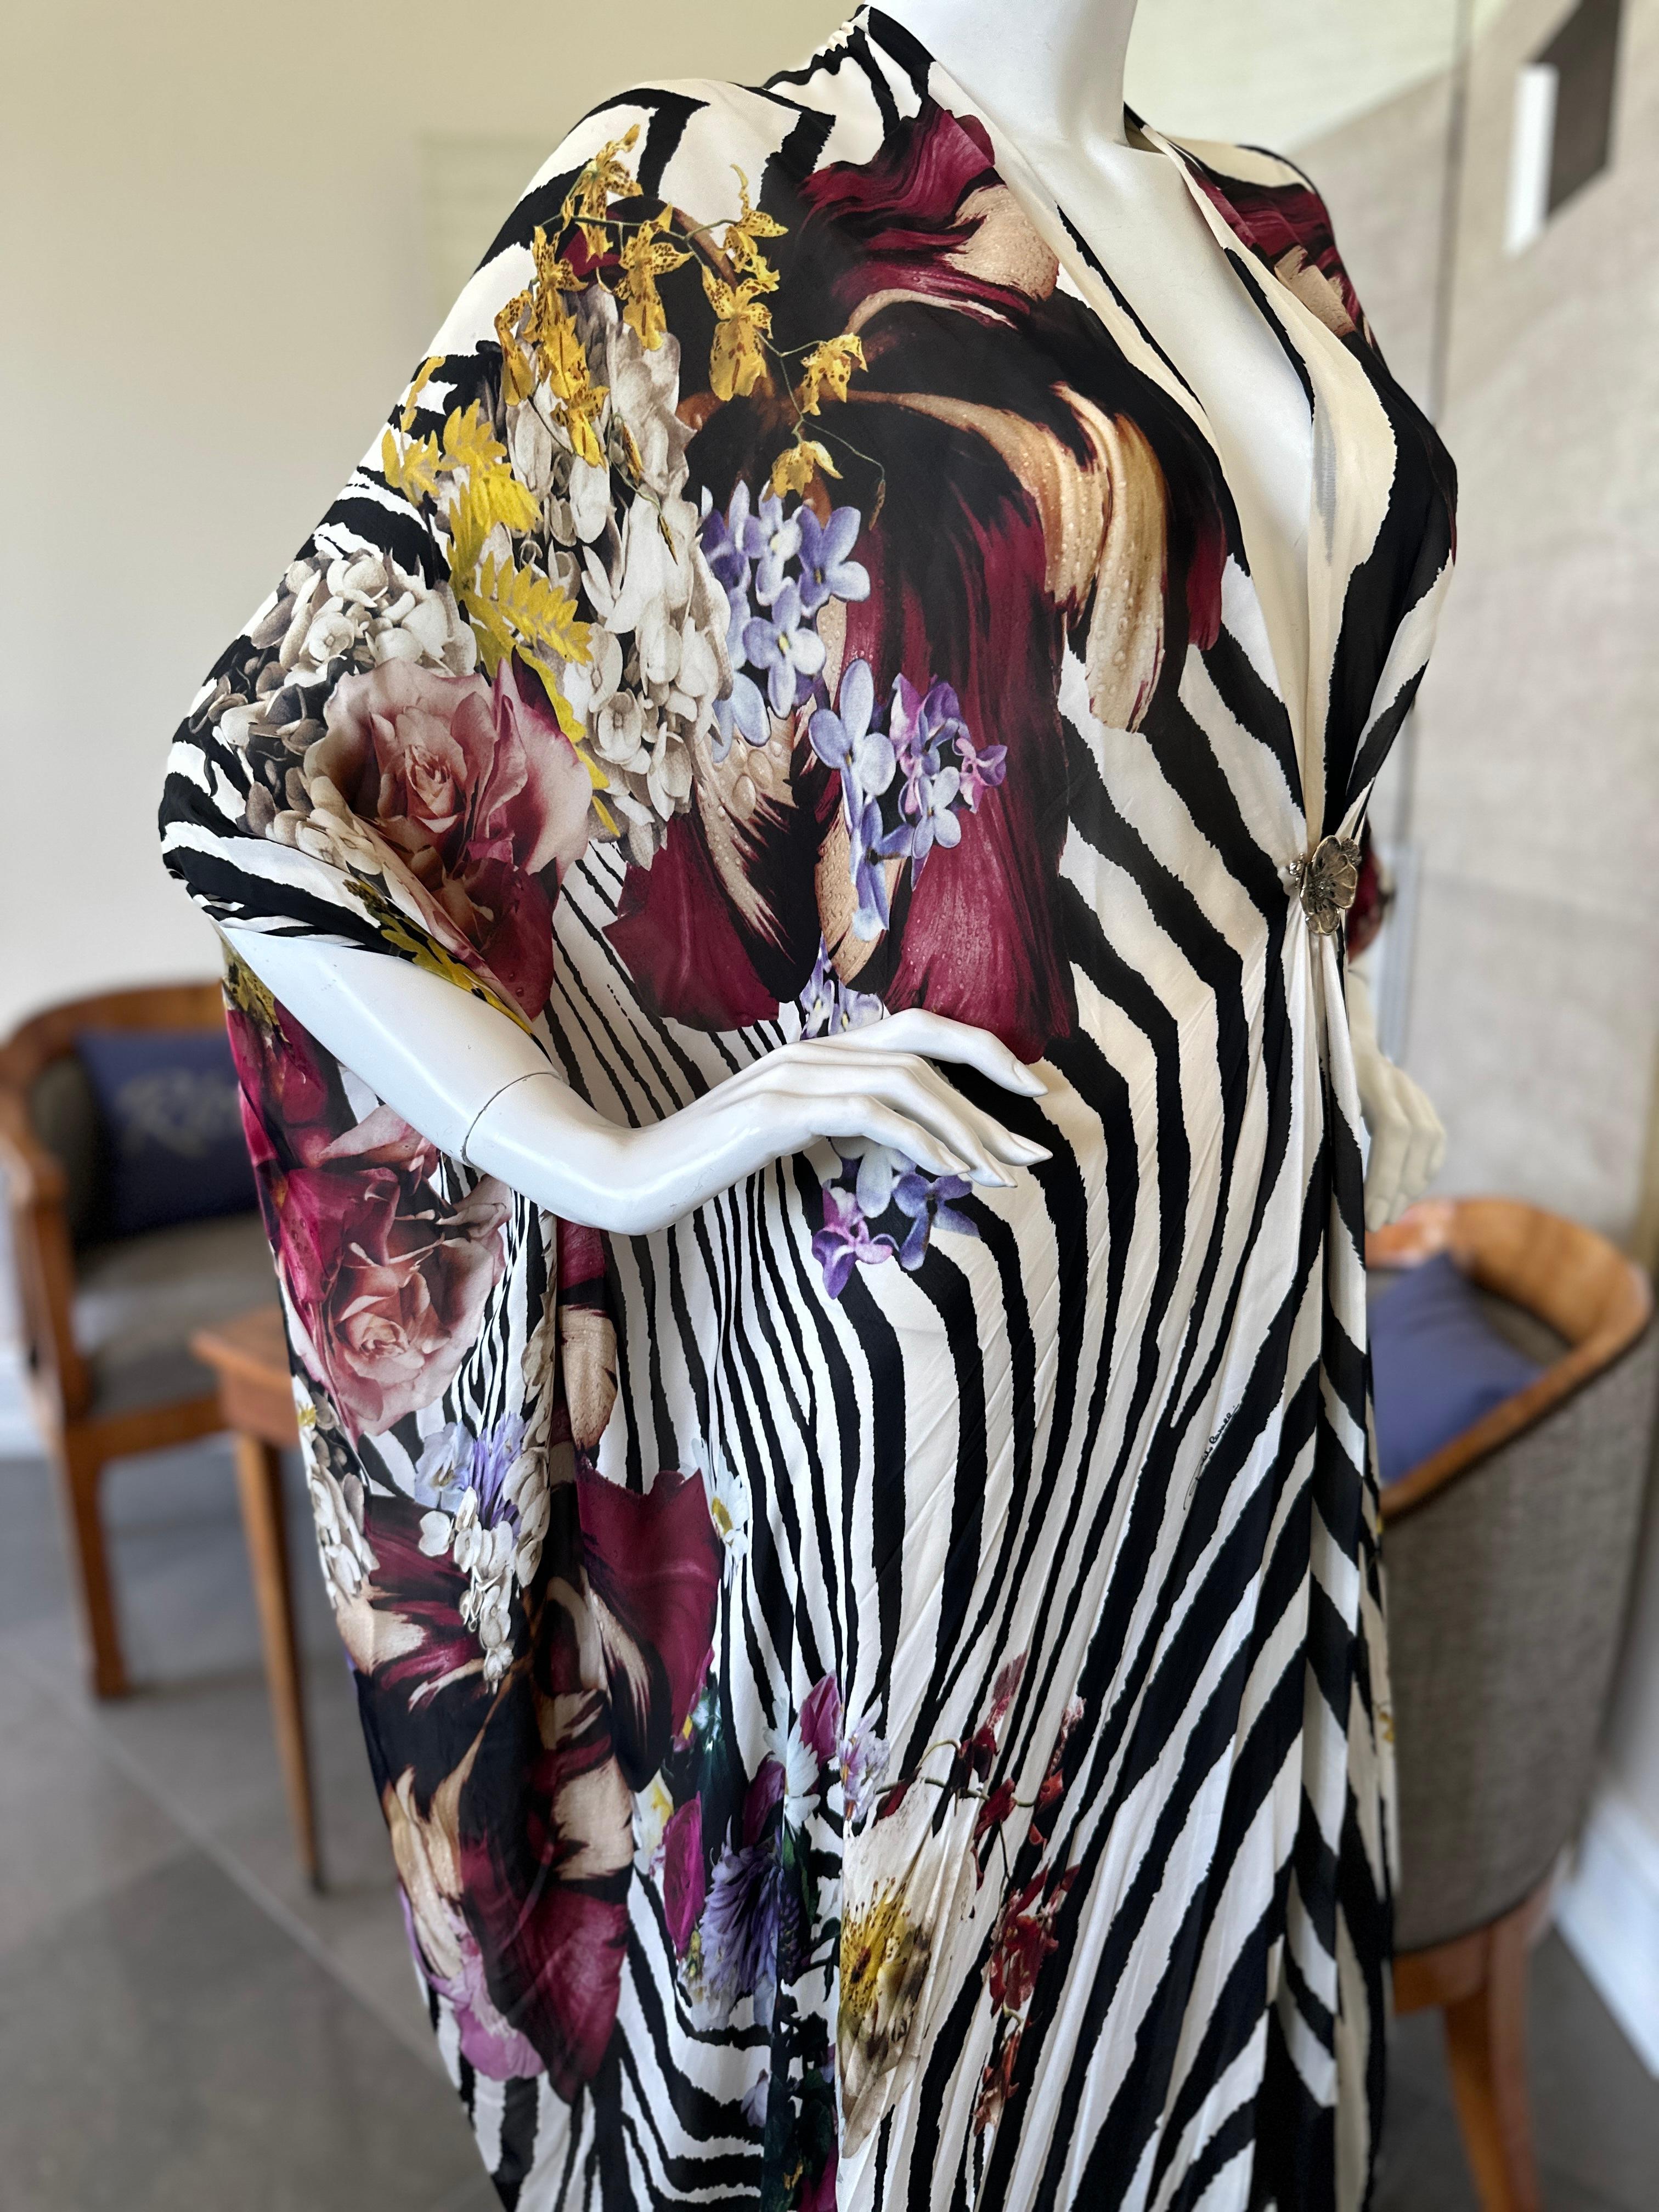 Roberto Cavalli Sensational Vintage Silk Zebra and Floral Print Caftan.
 Simply sensational.
Just toss it over your swimsuit to go from beach to bar.
 Size 38 but it is really an XXL
  Bust 48